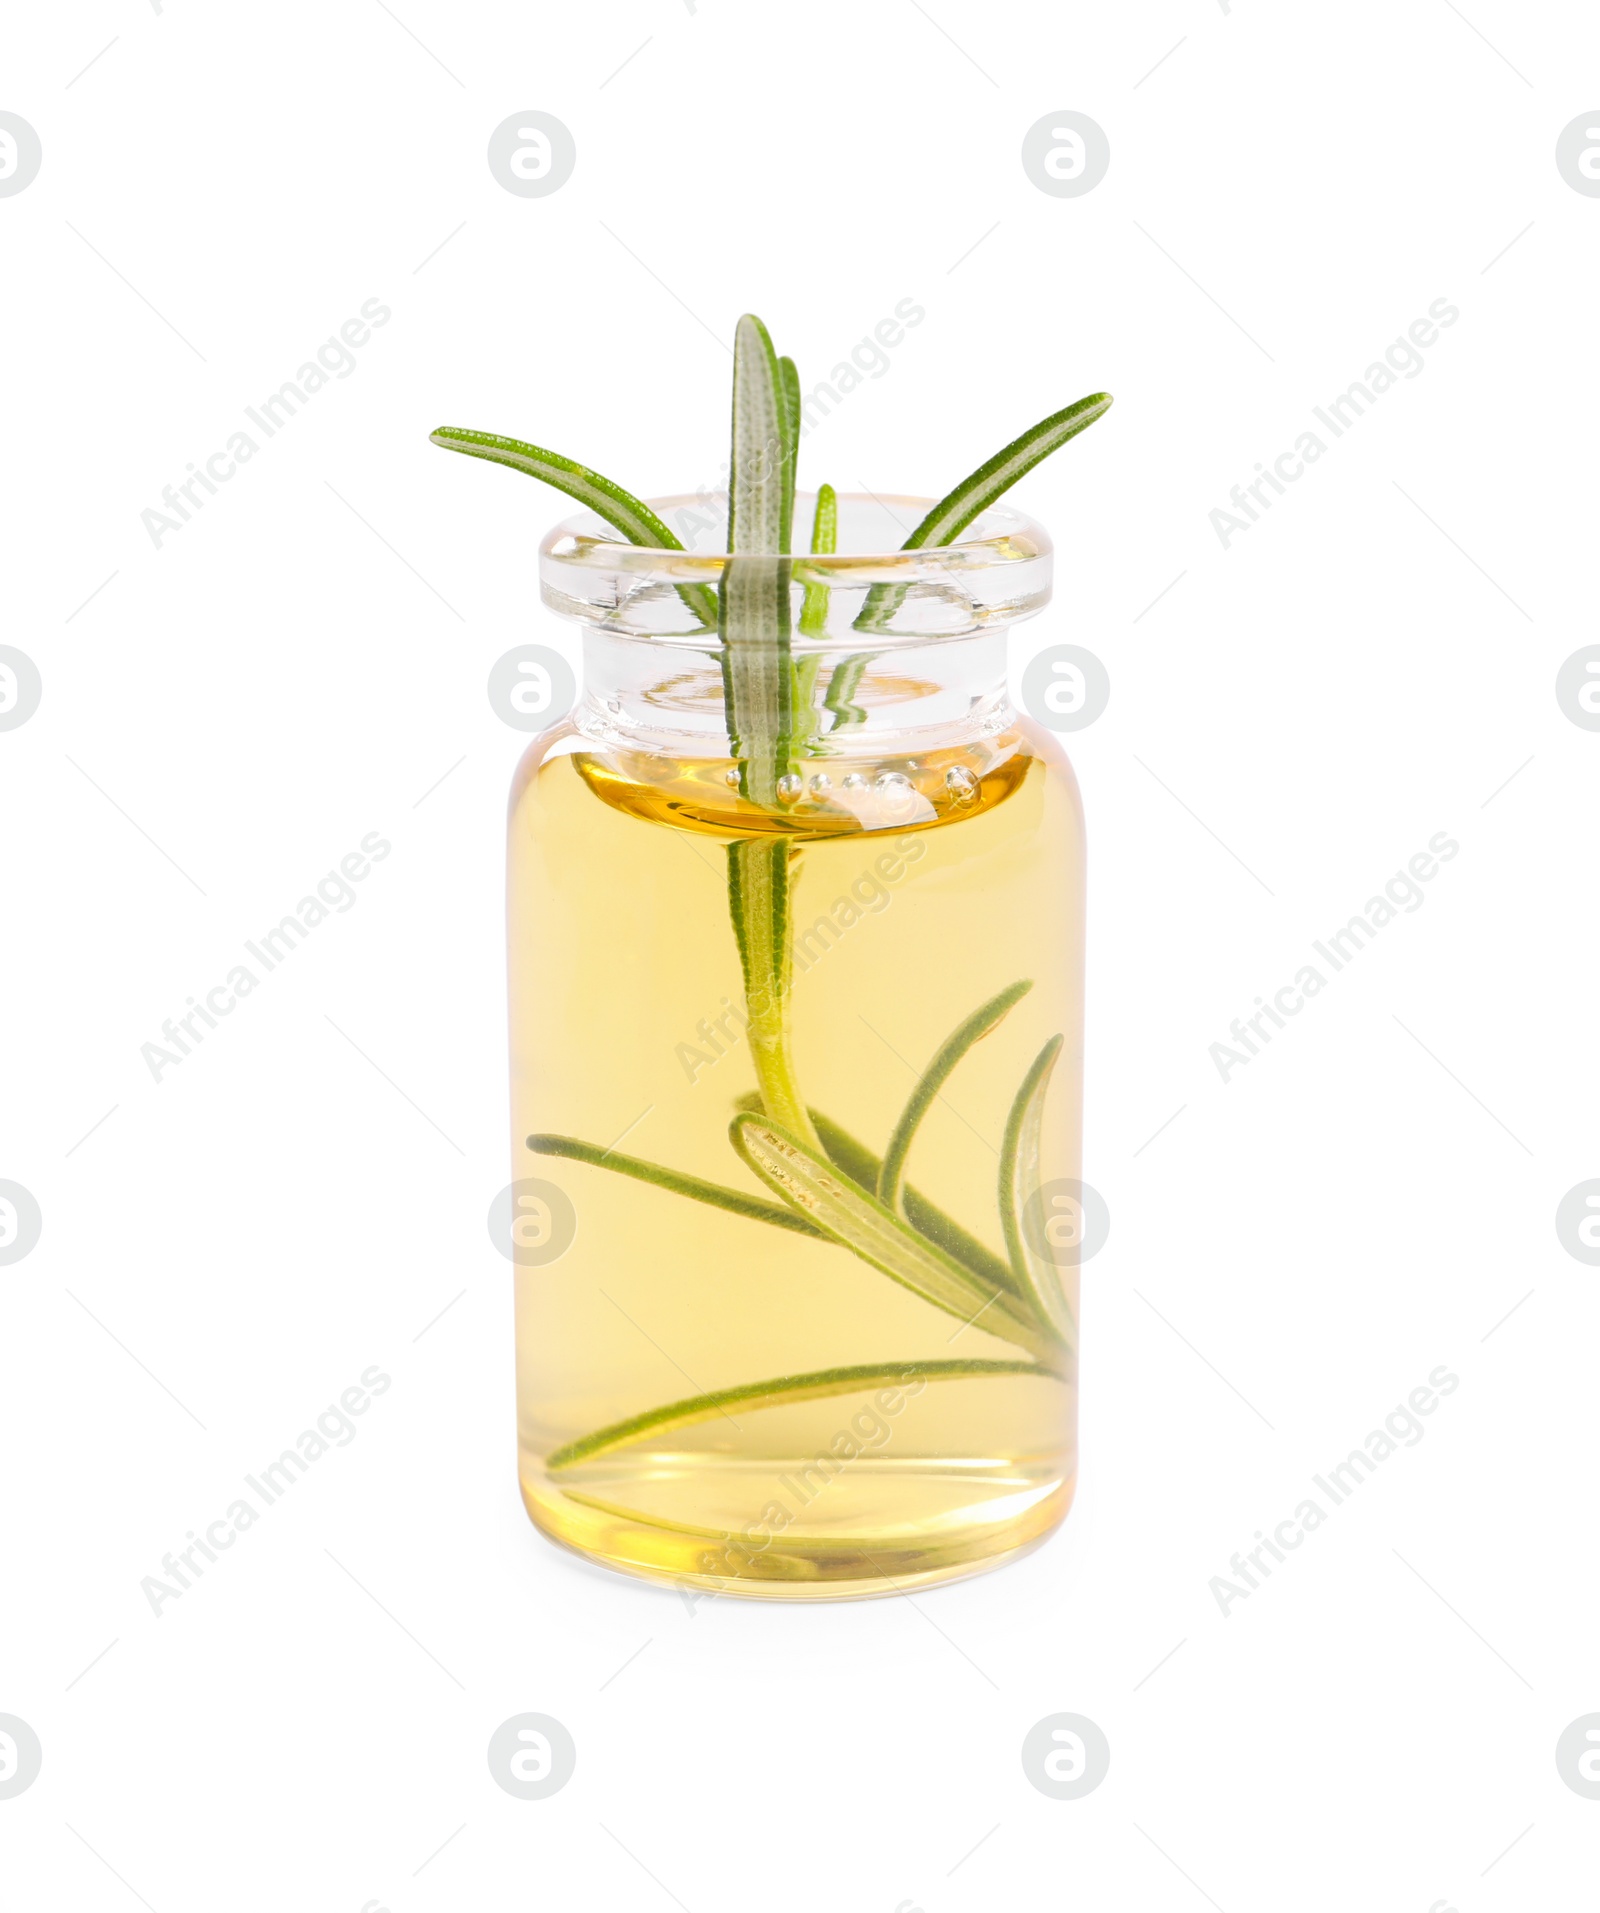 Photo of Bottle of essential oil with fresh rosemary sprig isolated on white